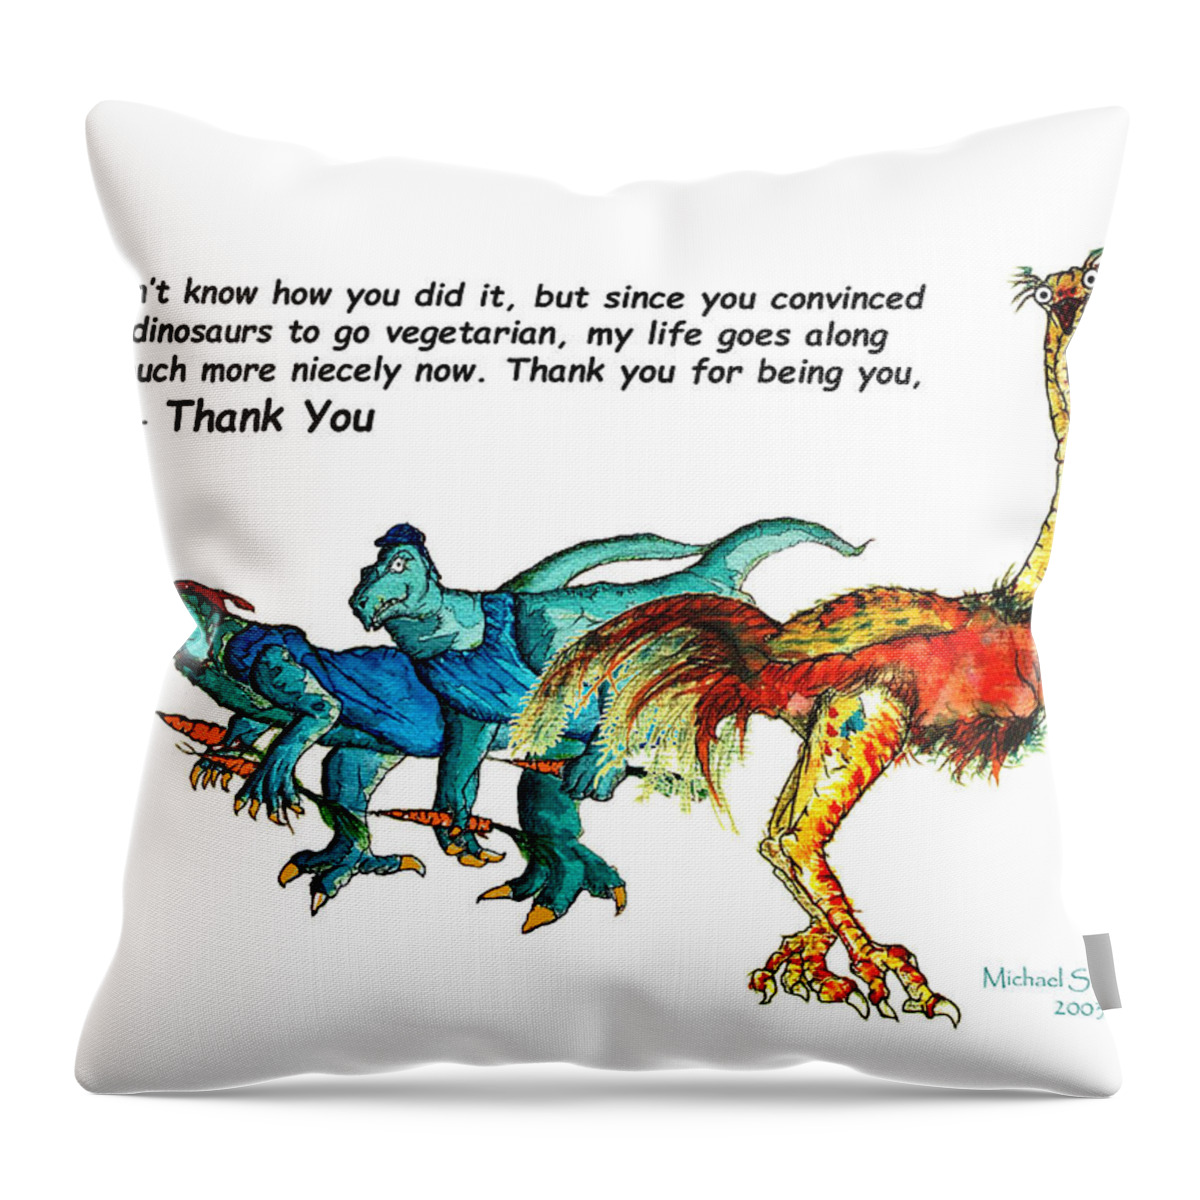 Dinosaurs Throw Pillow featuring the painting Dinosaur Thank You Card by Michael Shone SR